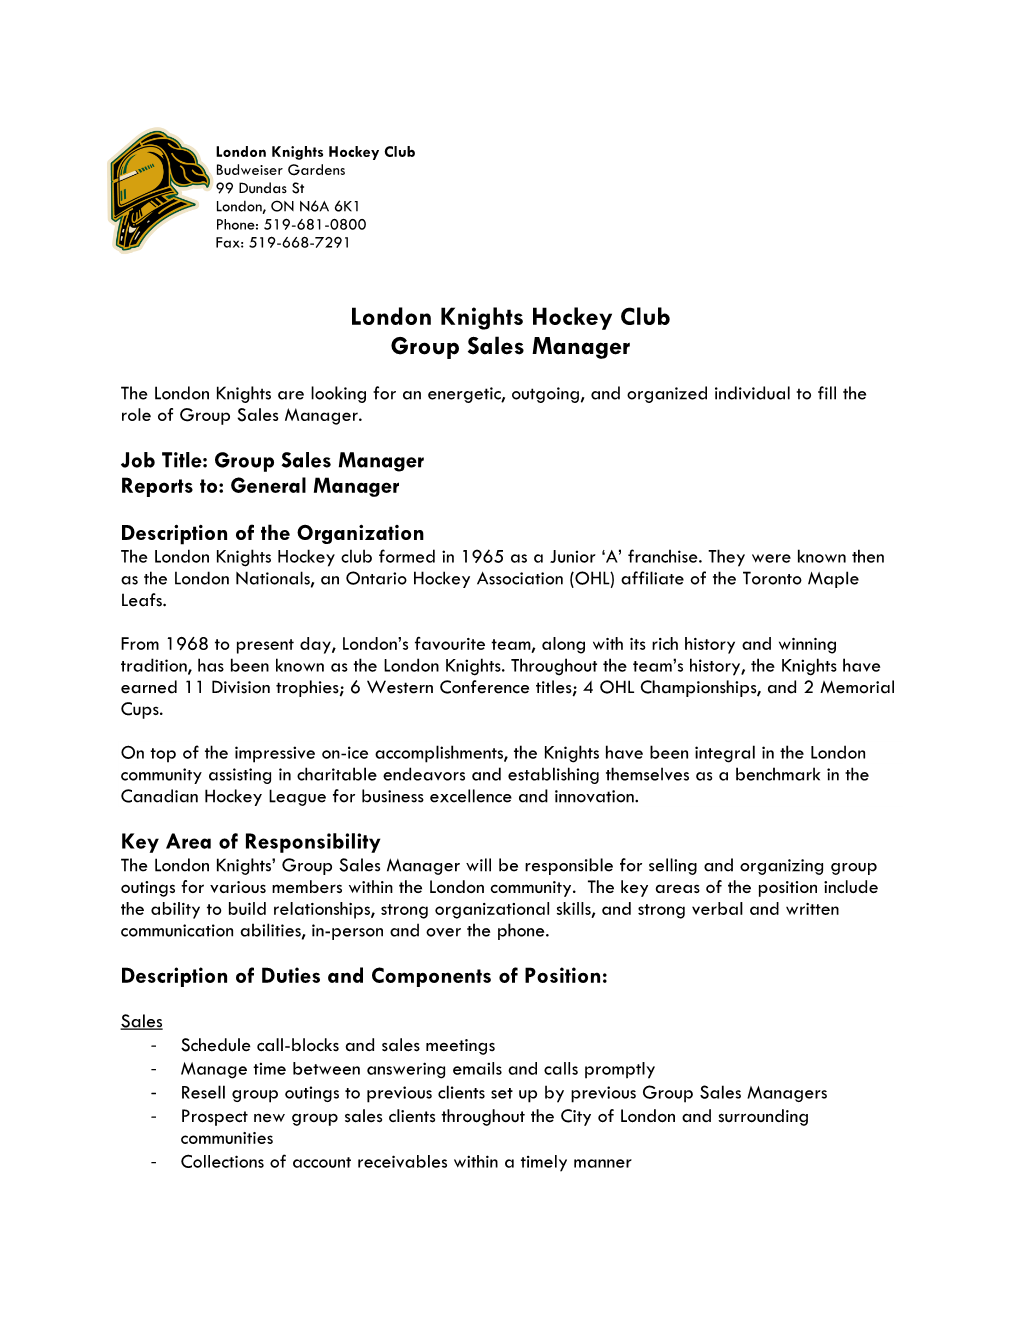 London Knights Hockey Club Group Sales Manager